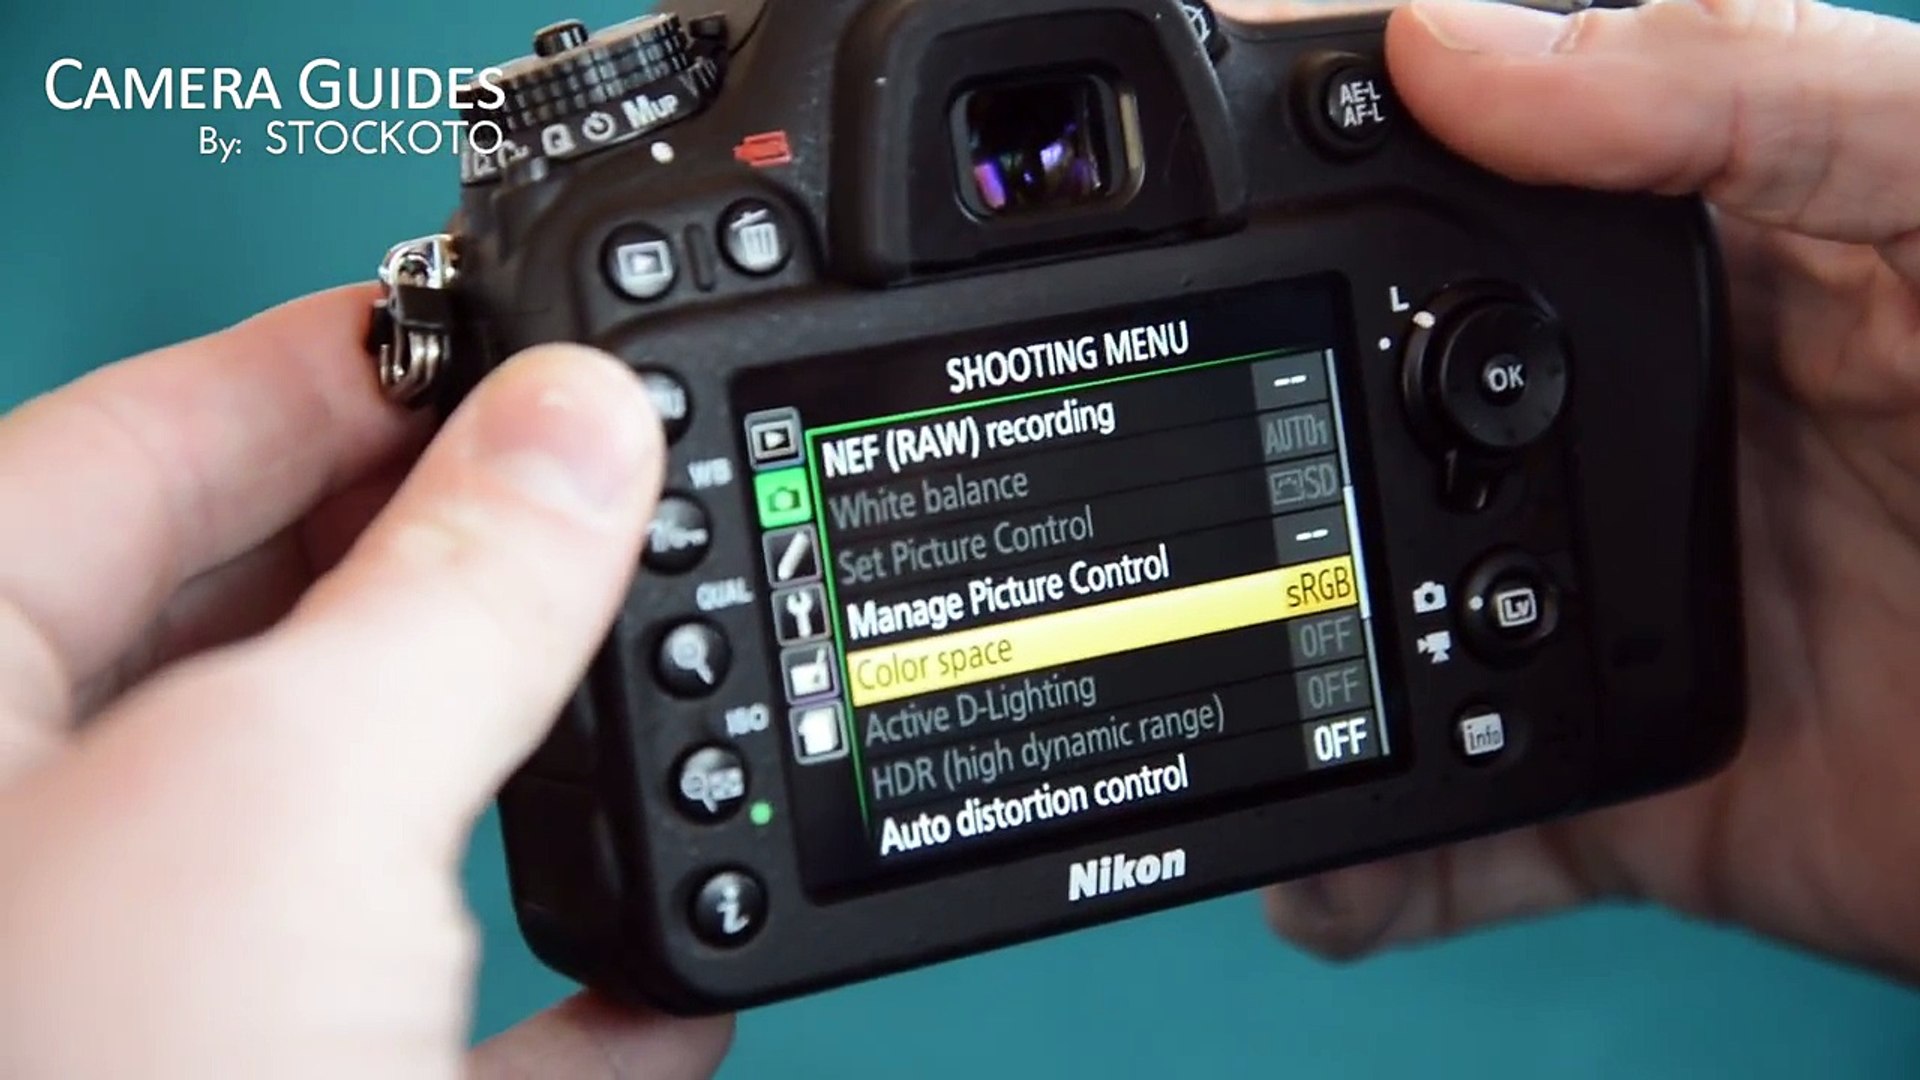 How to shoot HDR photos with the Nikon D7100 - video Dailymotion